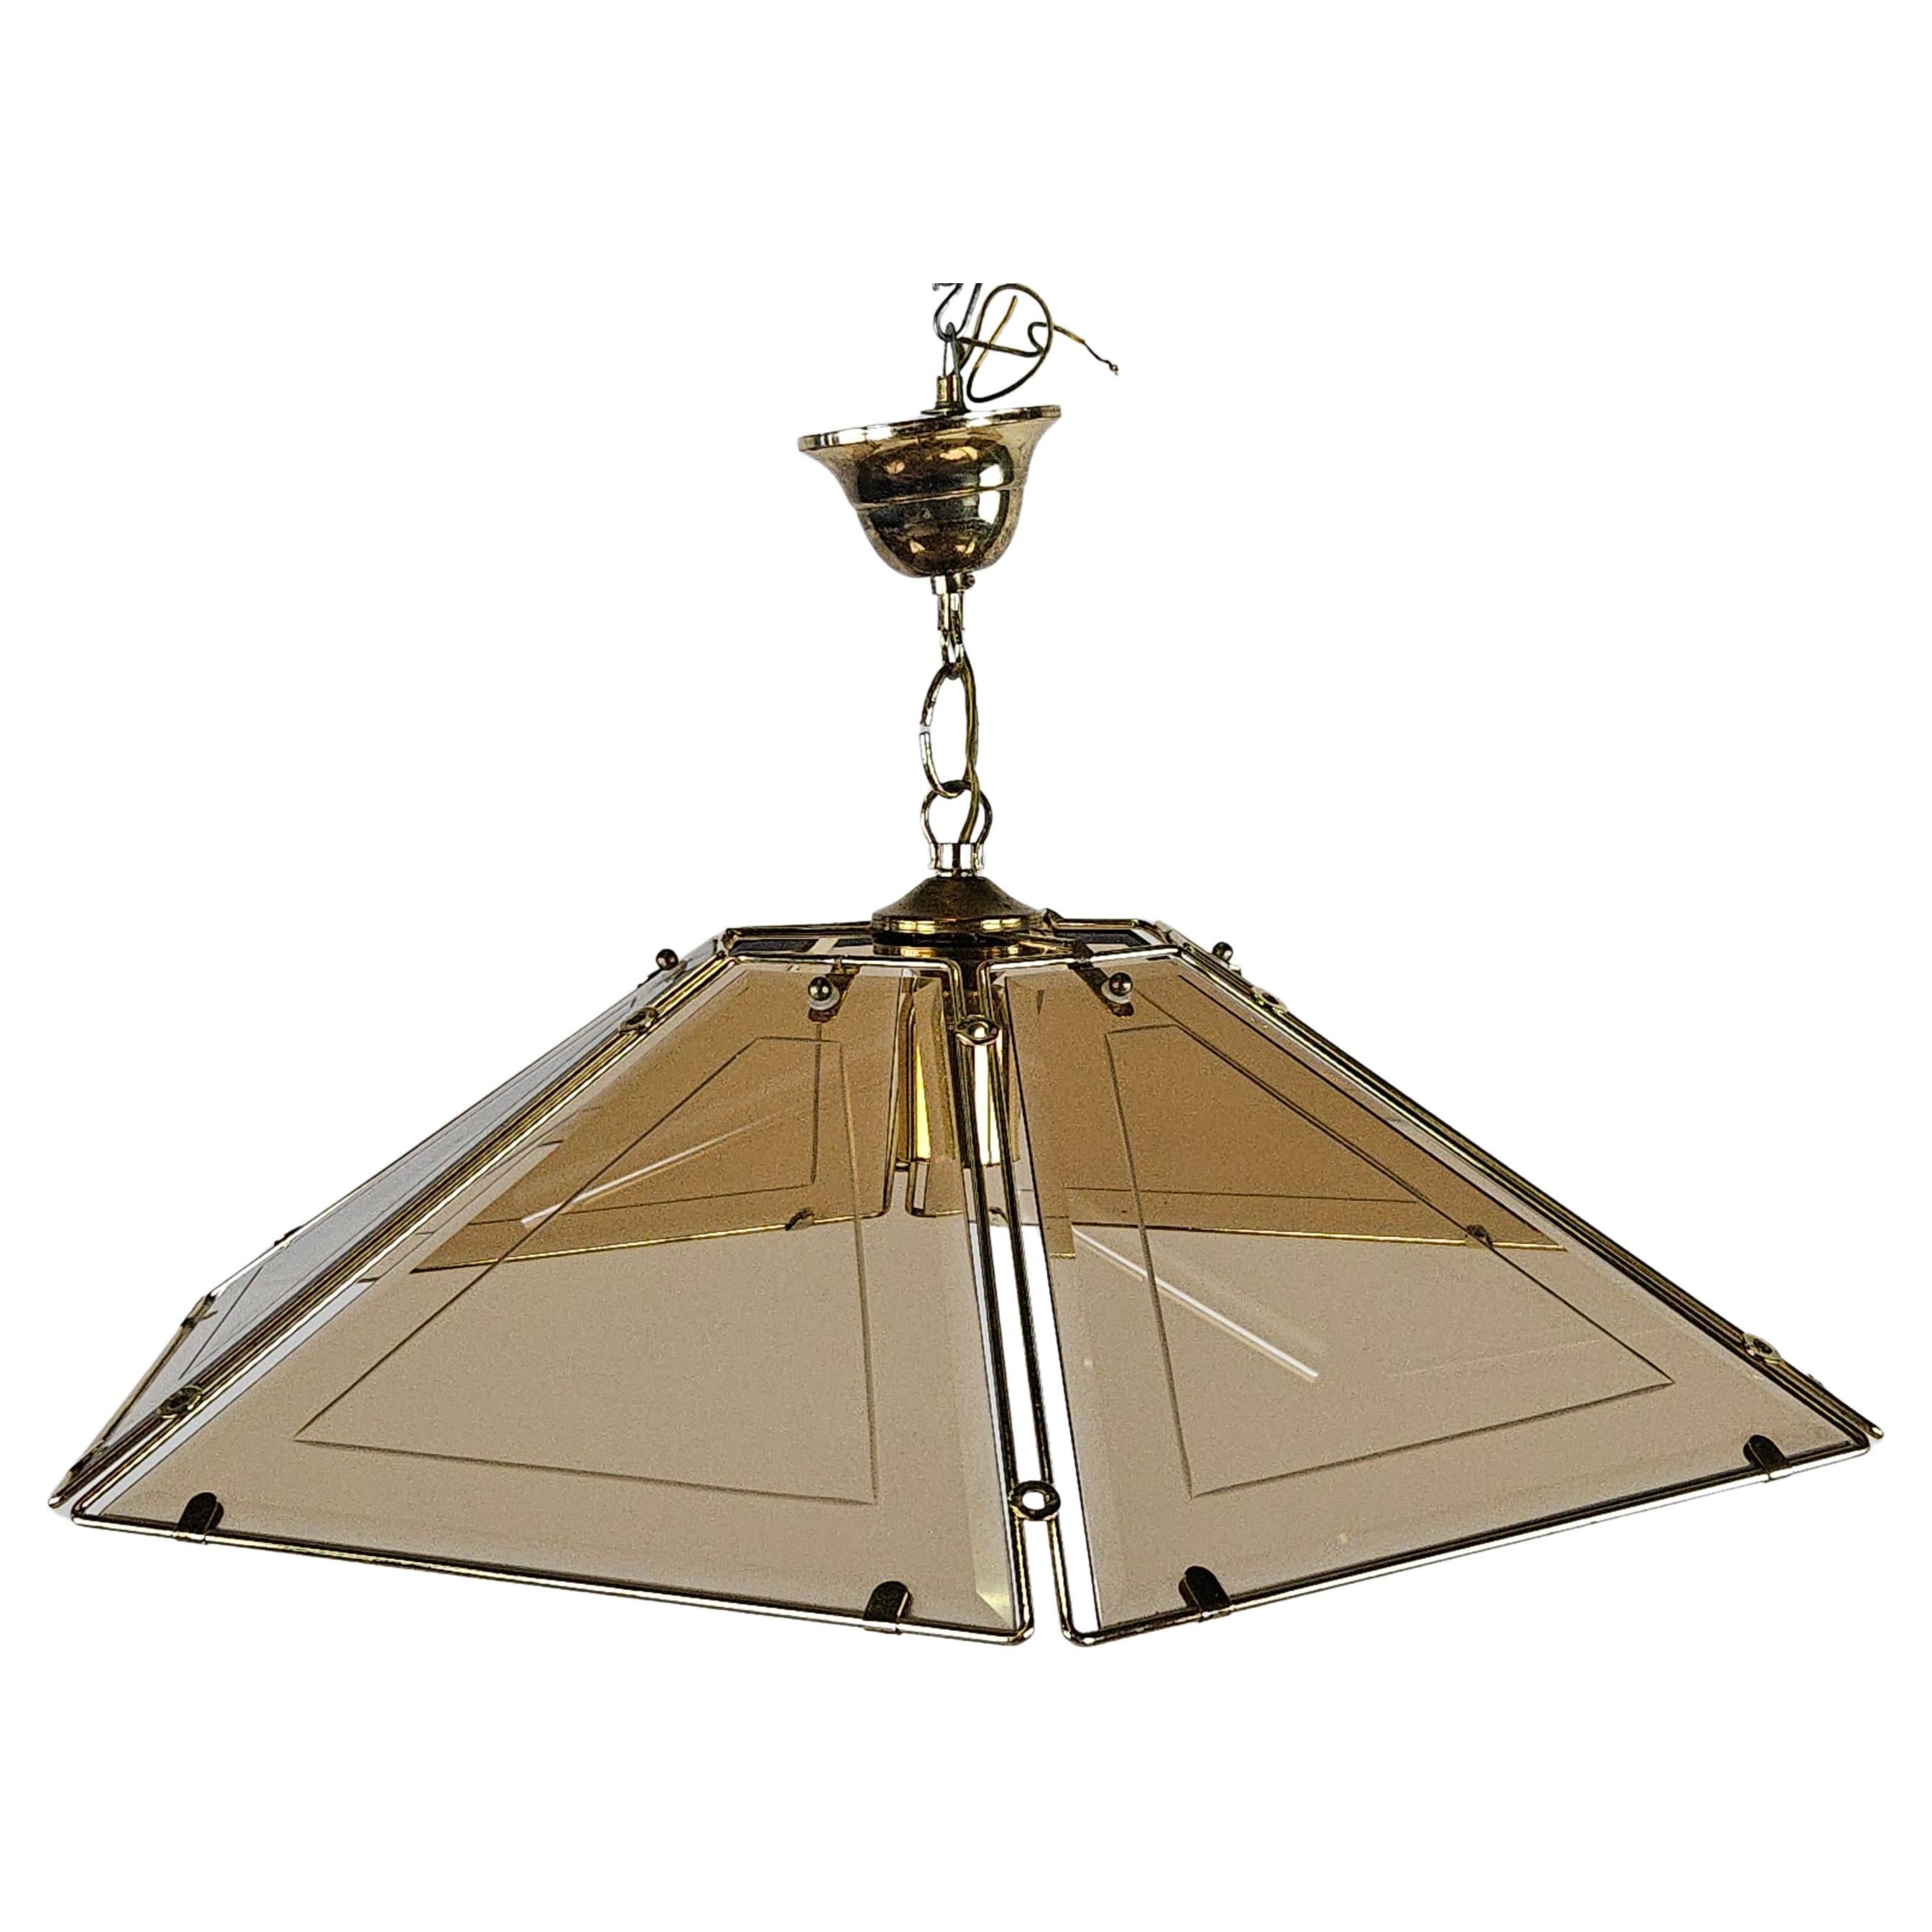 Hexagonal brass and glass chandelier 20th century For Sale